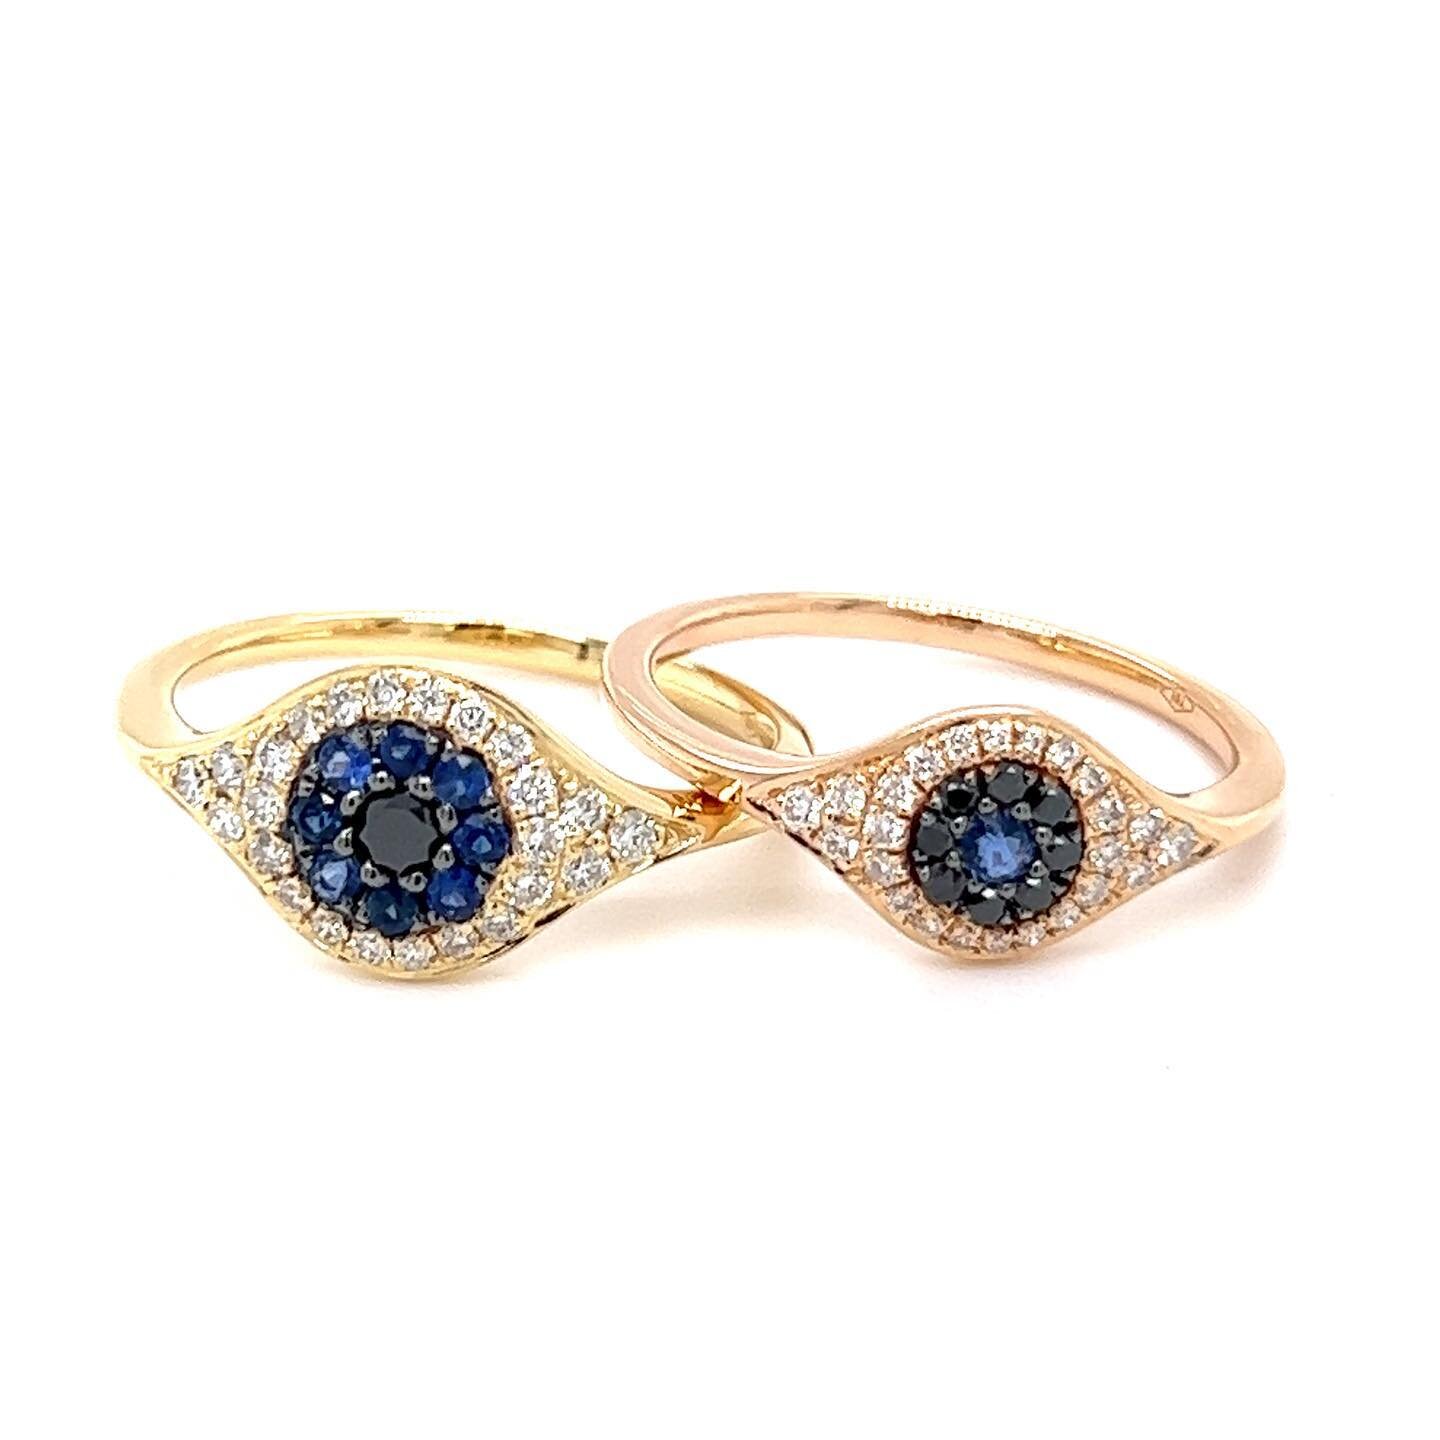 Here&rsquo;s lookin&rsquo; at you. 18k Solid gold with diamonds &amp; sapphires. 🤩
#weissjewelry #evileyering